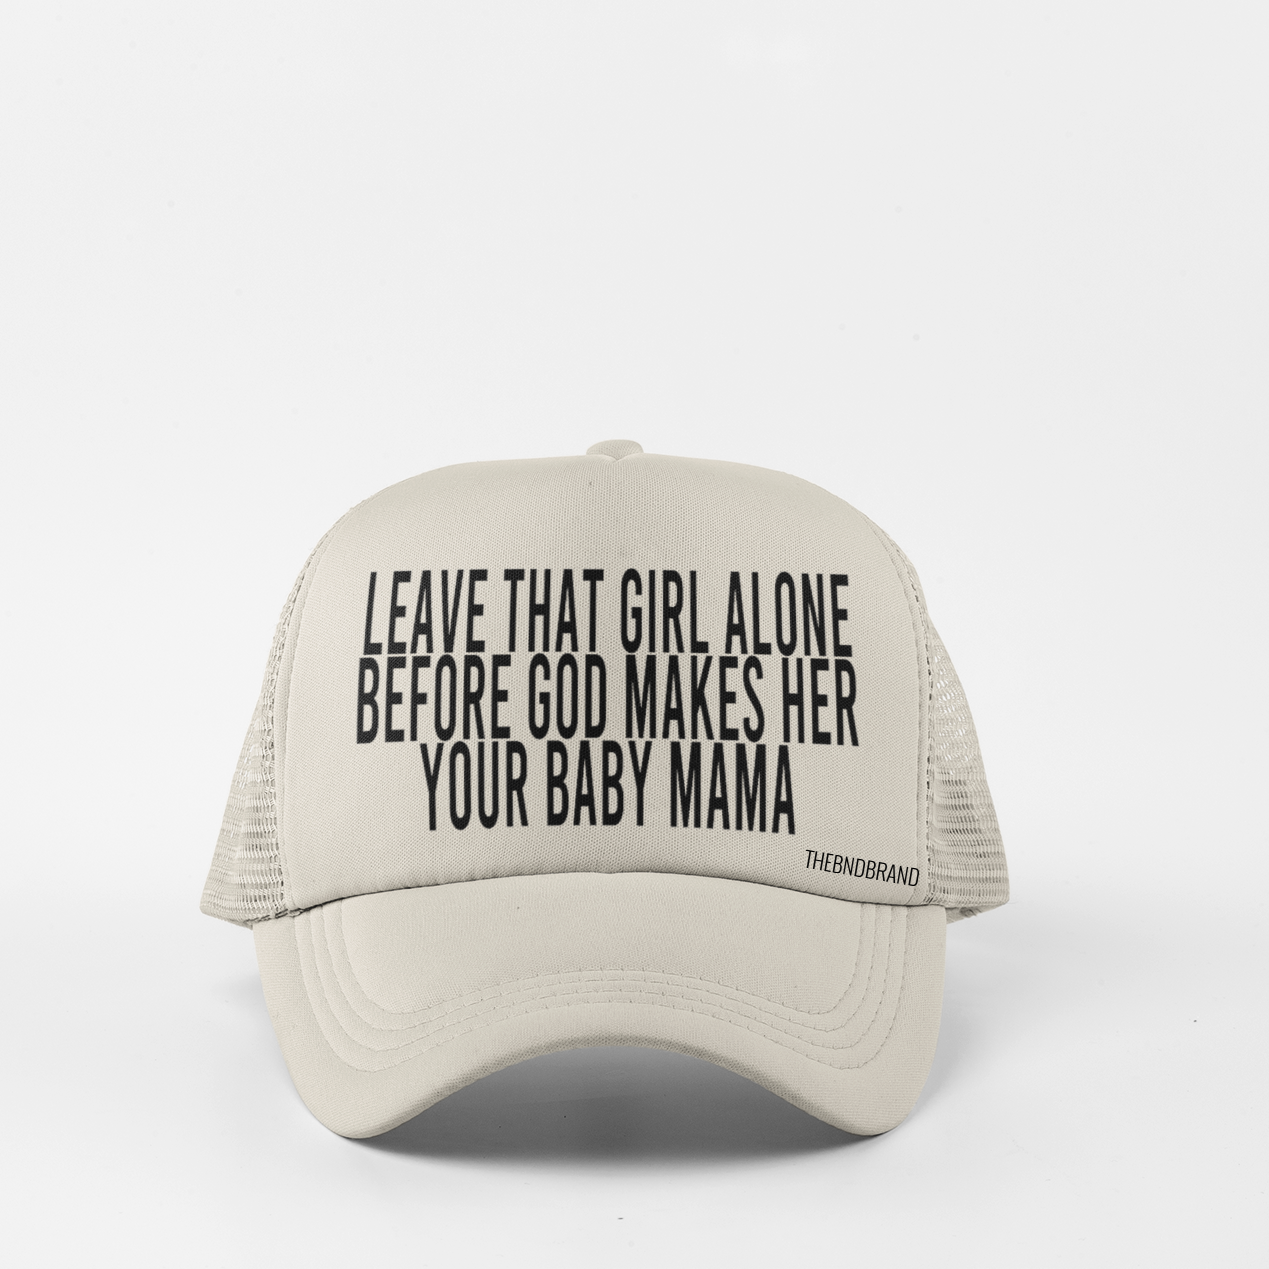 LEAVE THAT GIRL ALONE BEFORE GOD MAKES HER YOUR BABY MAMA HAT